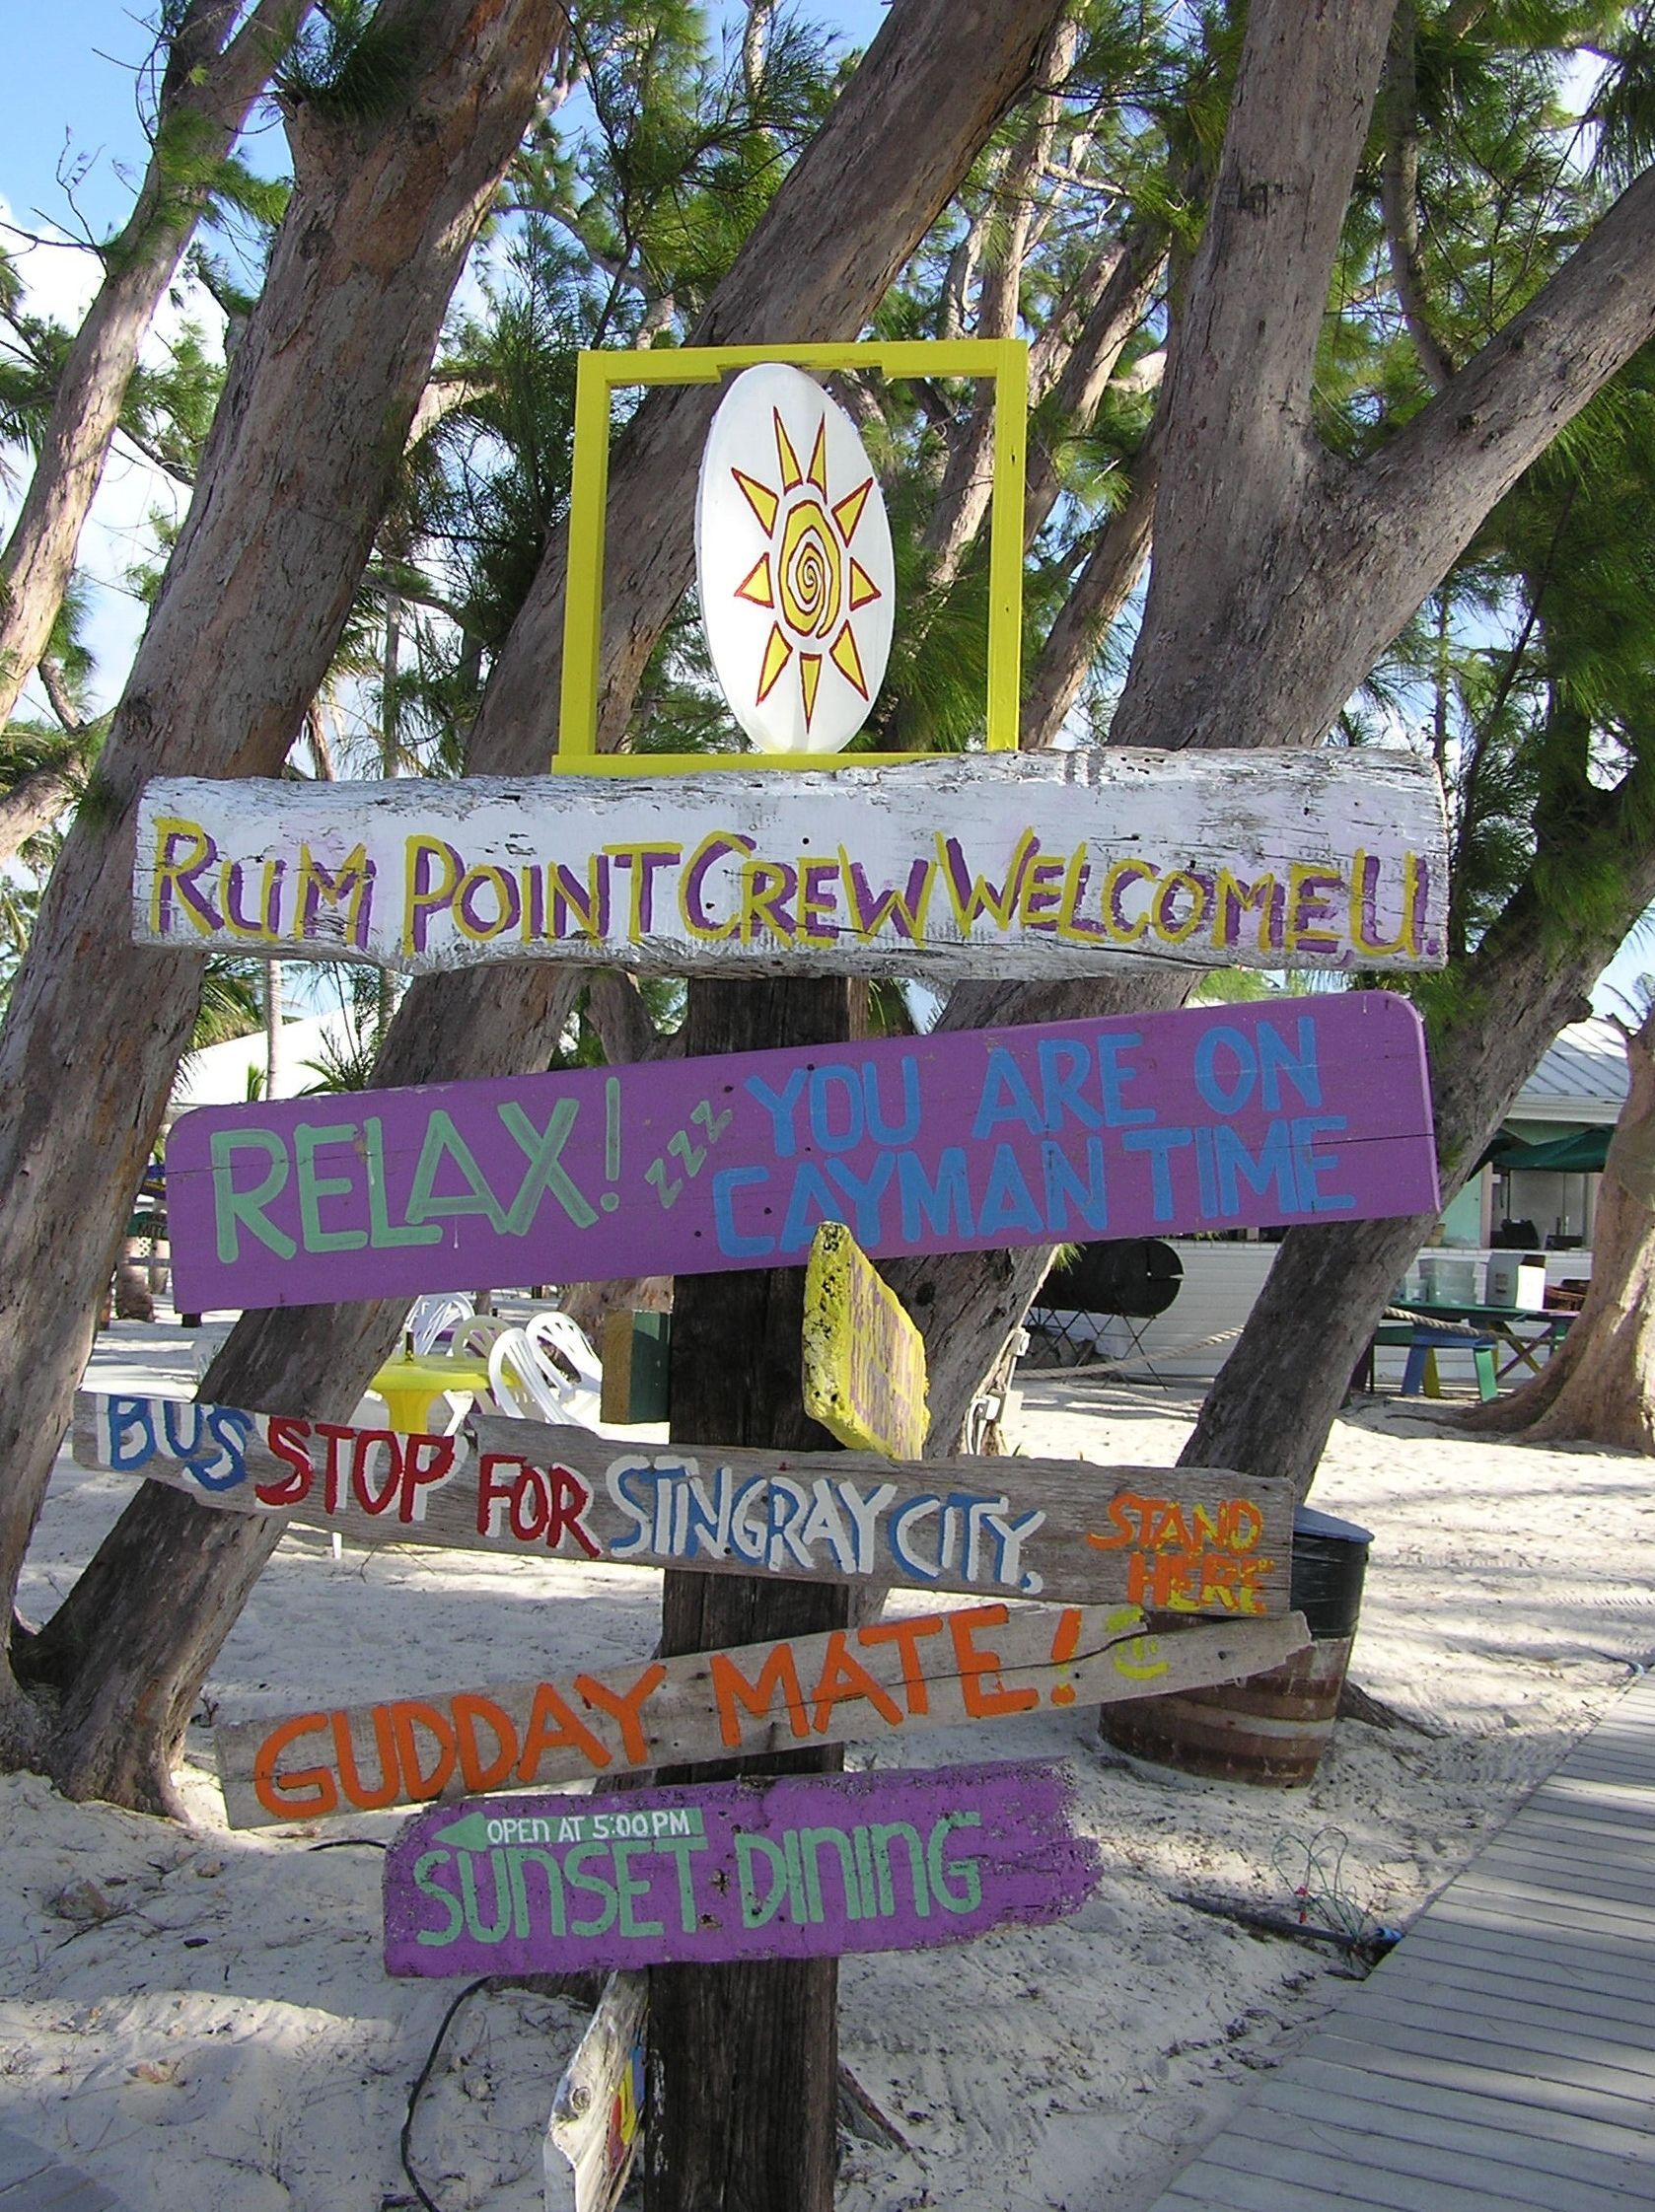 Rum Point sign Grand Cayman. Grand cayman island, Cayman island, Cayman islands